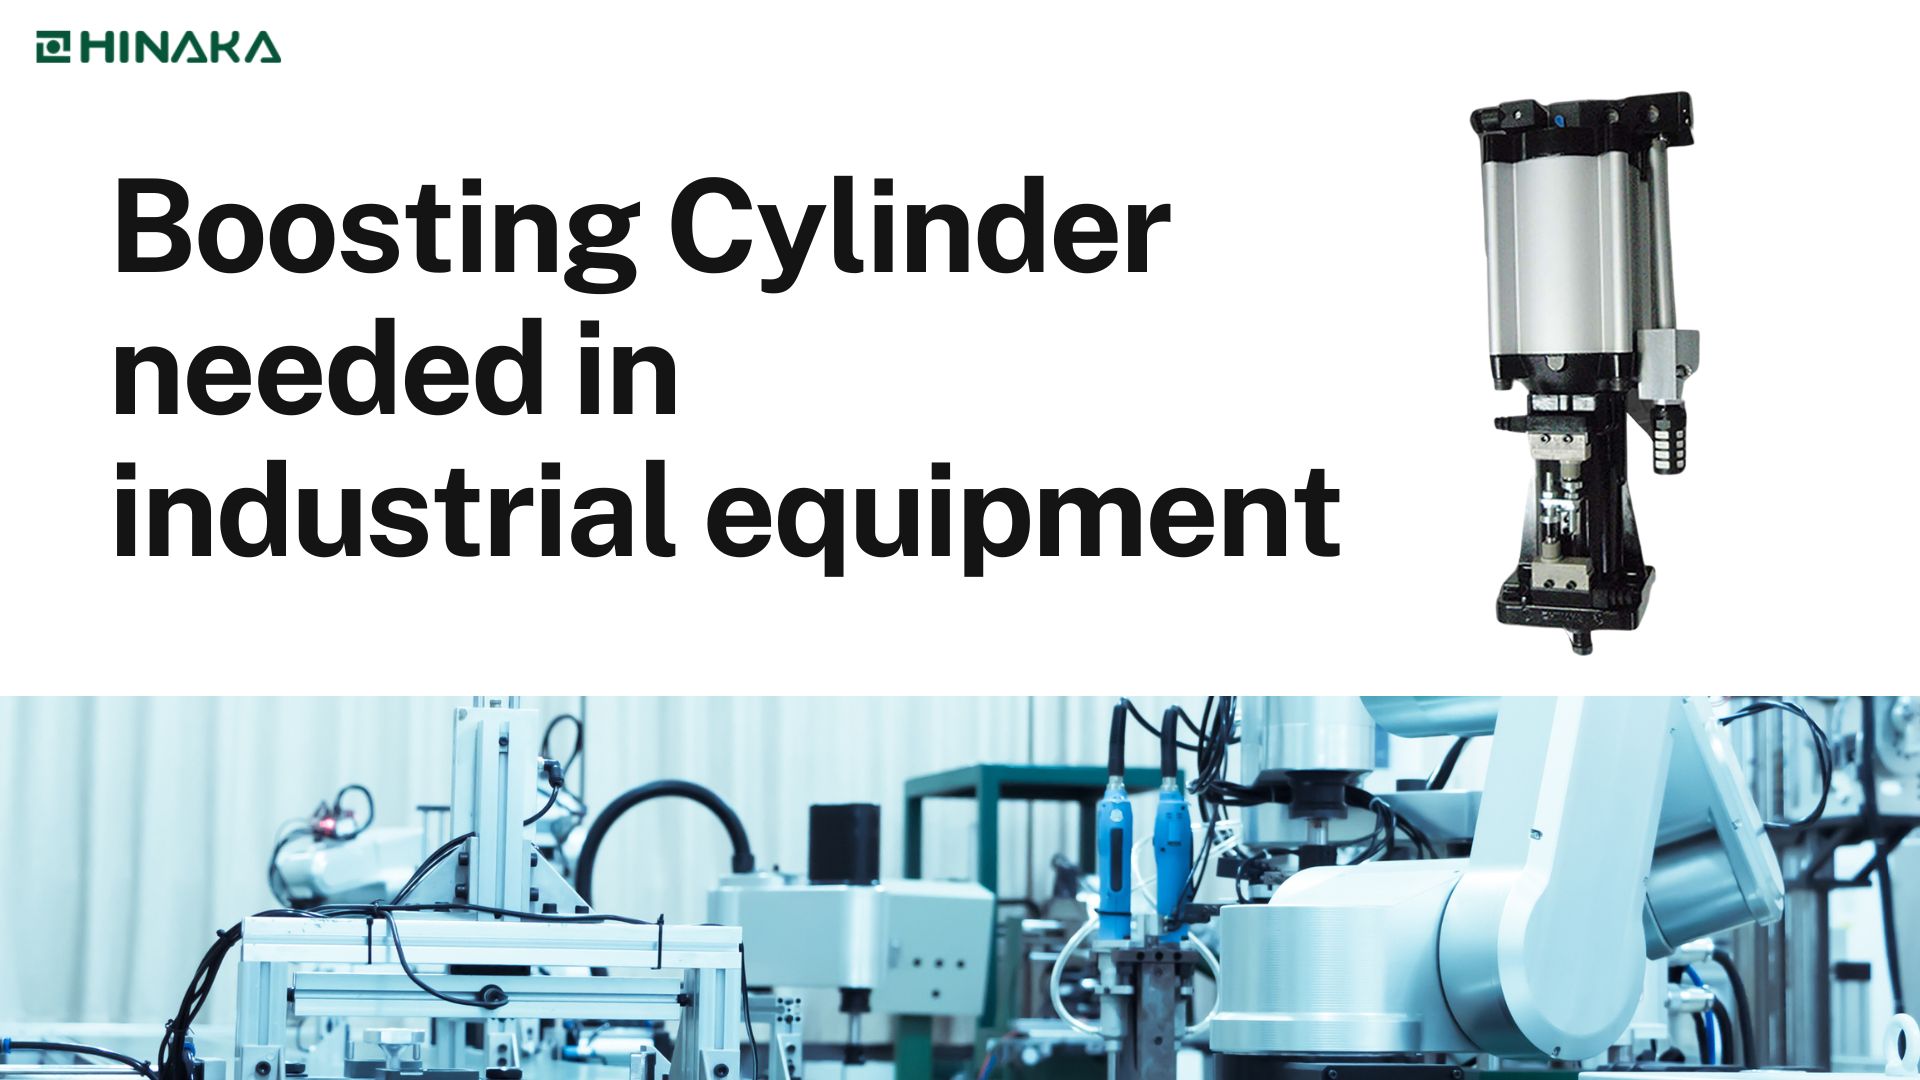 Why is boosting cylinder needed in industrial equipment?